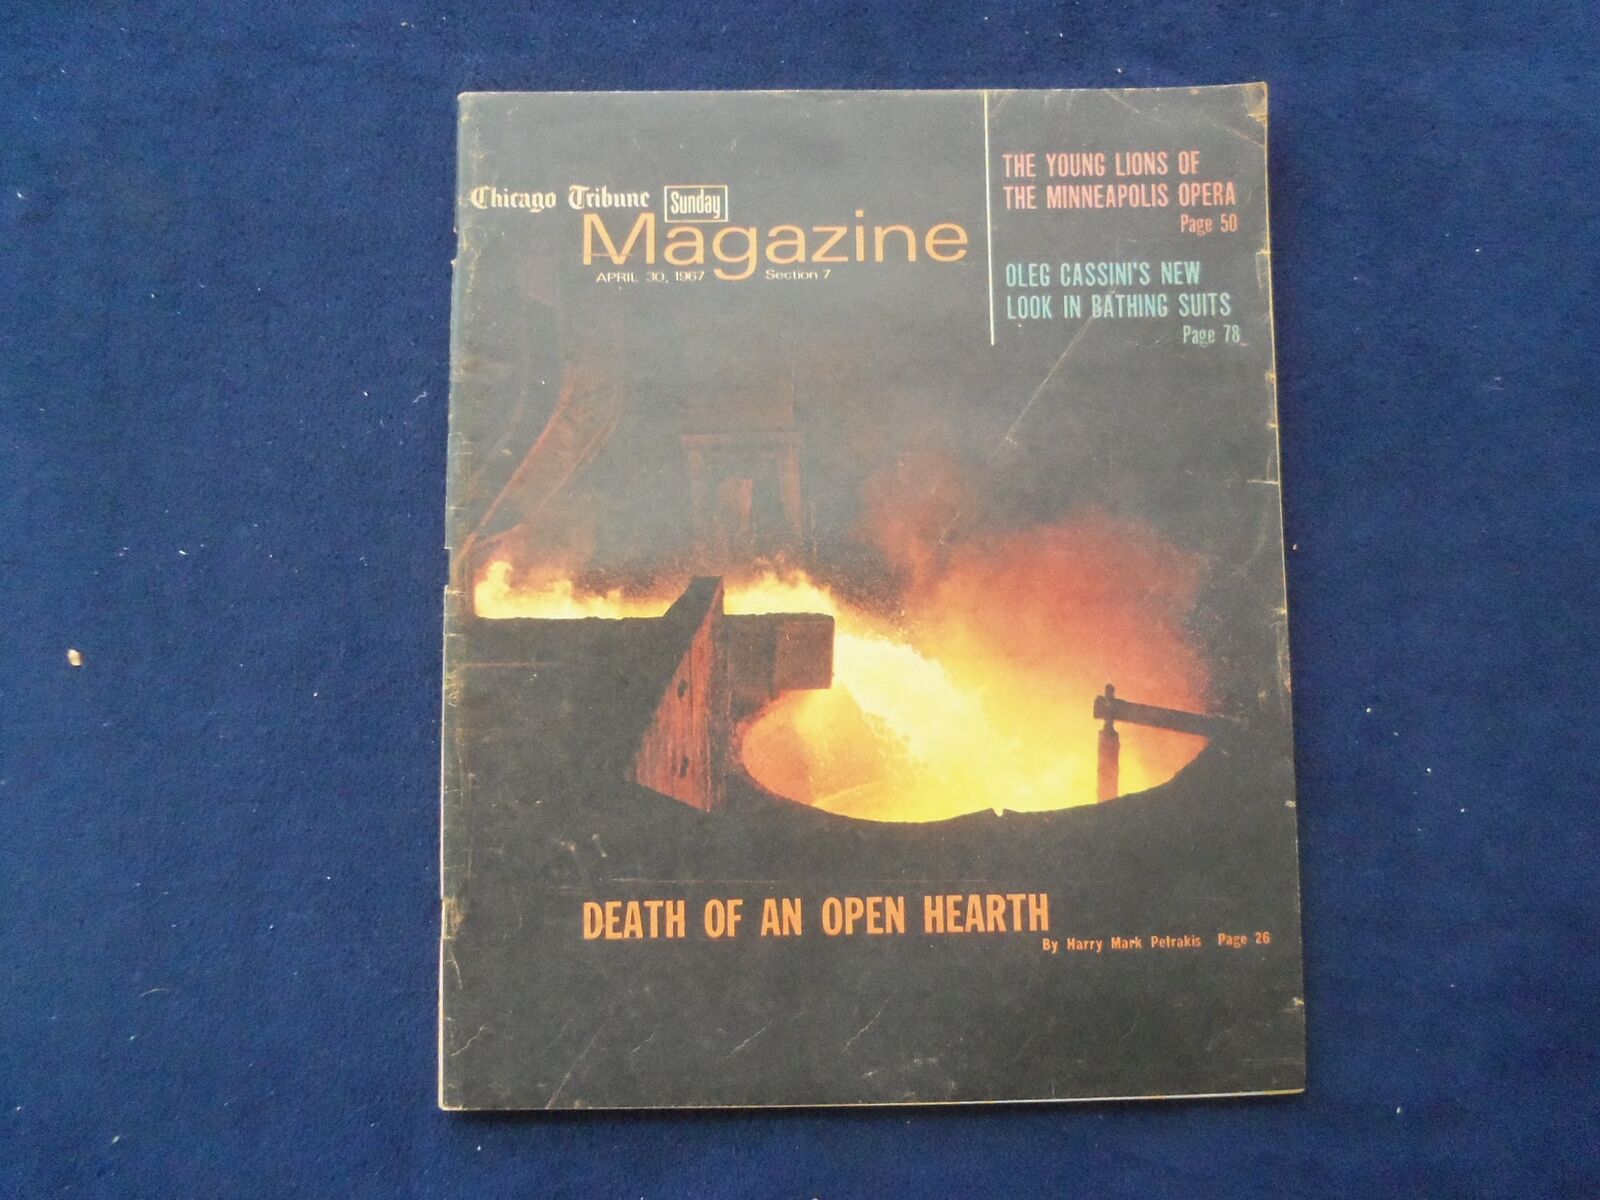 1967 APRIL 30 CHICAGO TRIBUNE MAGAZINE SECTION -DEATH OF AN OPEN HEARTH- NP 6388